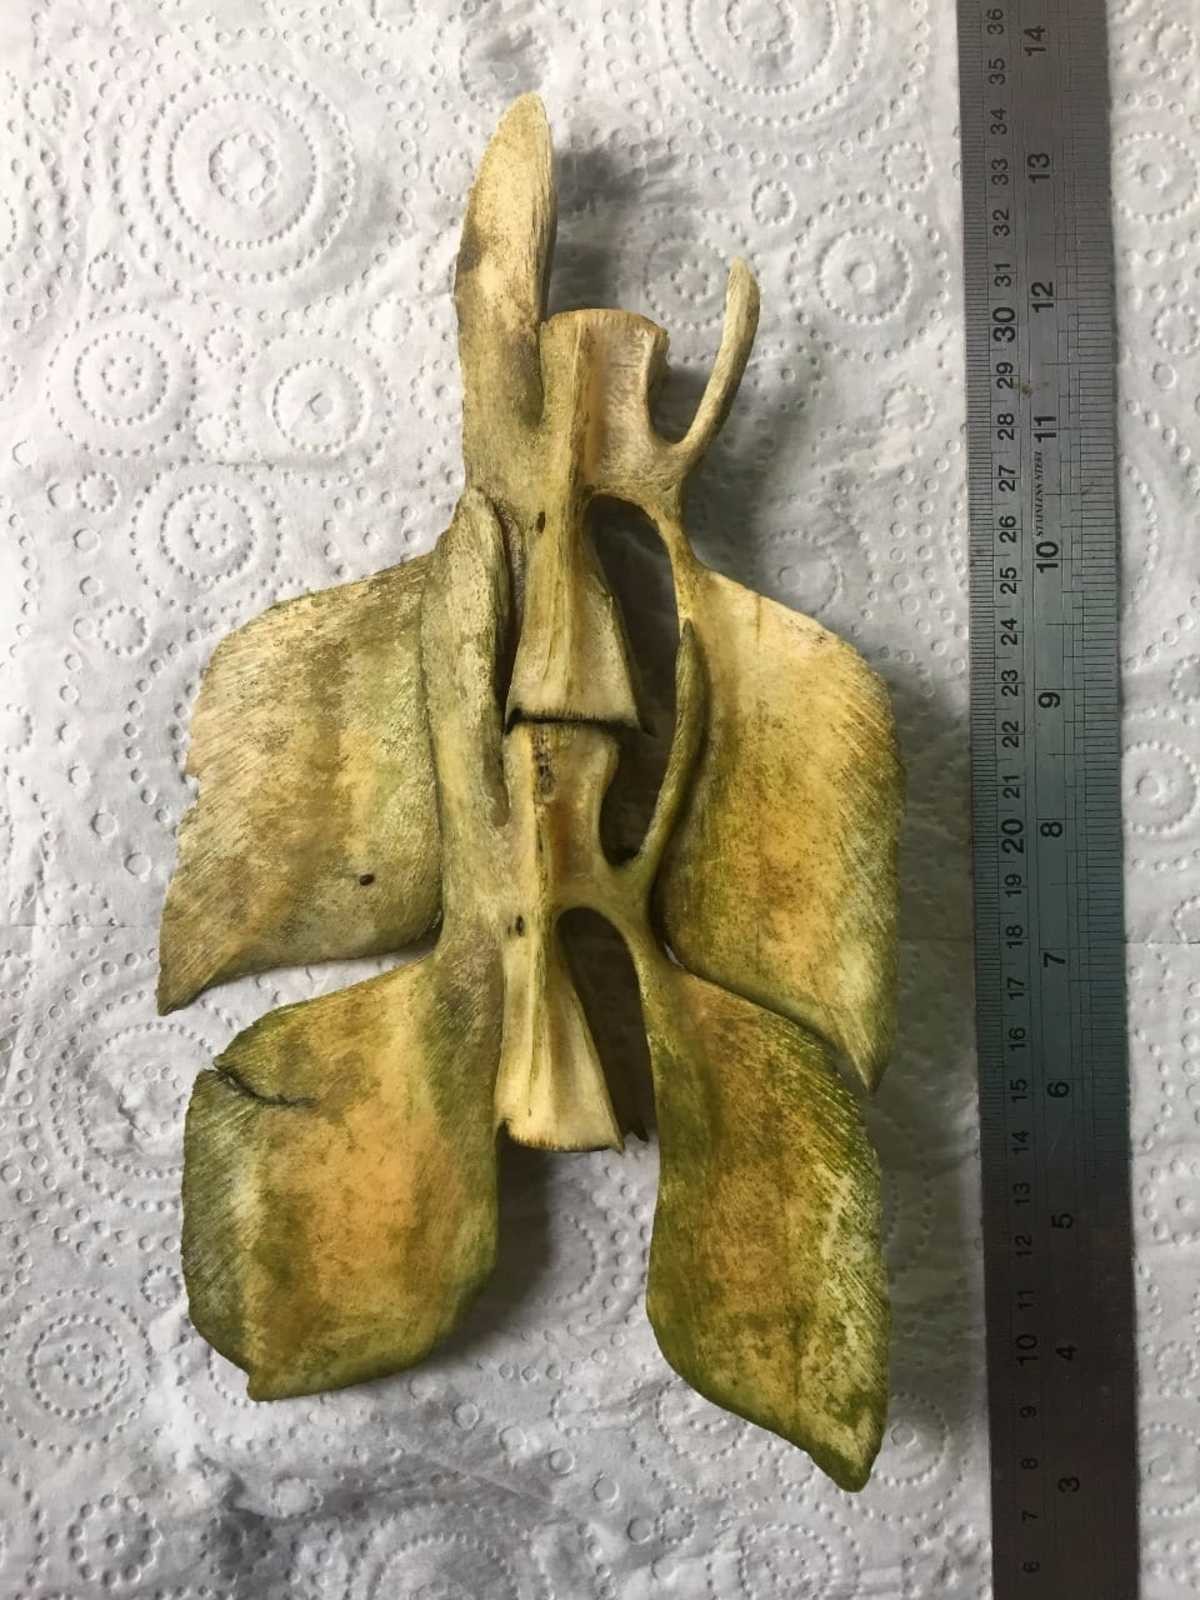 Weird bone from new zealand. Anybody know wtf this thing is? Found it near volcanic eruption site.. Kiwi here. You found the remains of a Taniwha, an ancient and powerful beast native to the waters of New Zealand. Keep it safe, aslong as the whole skeleton is 